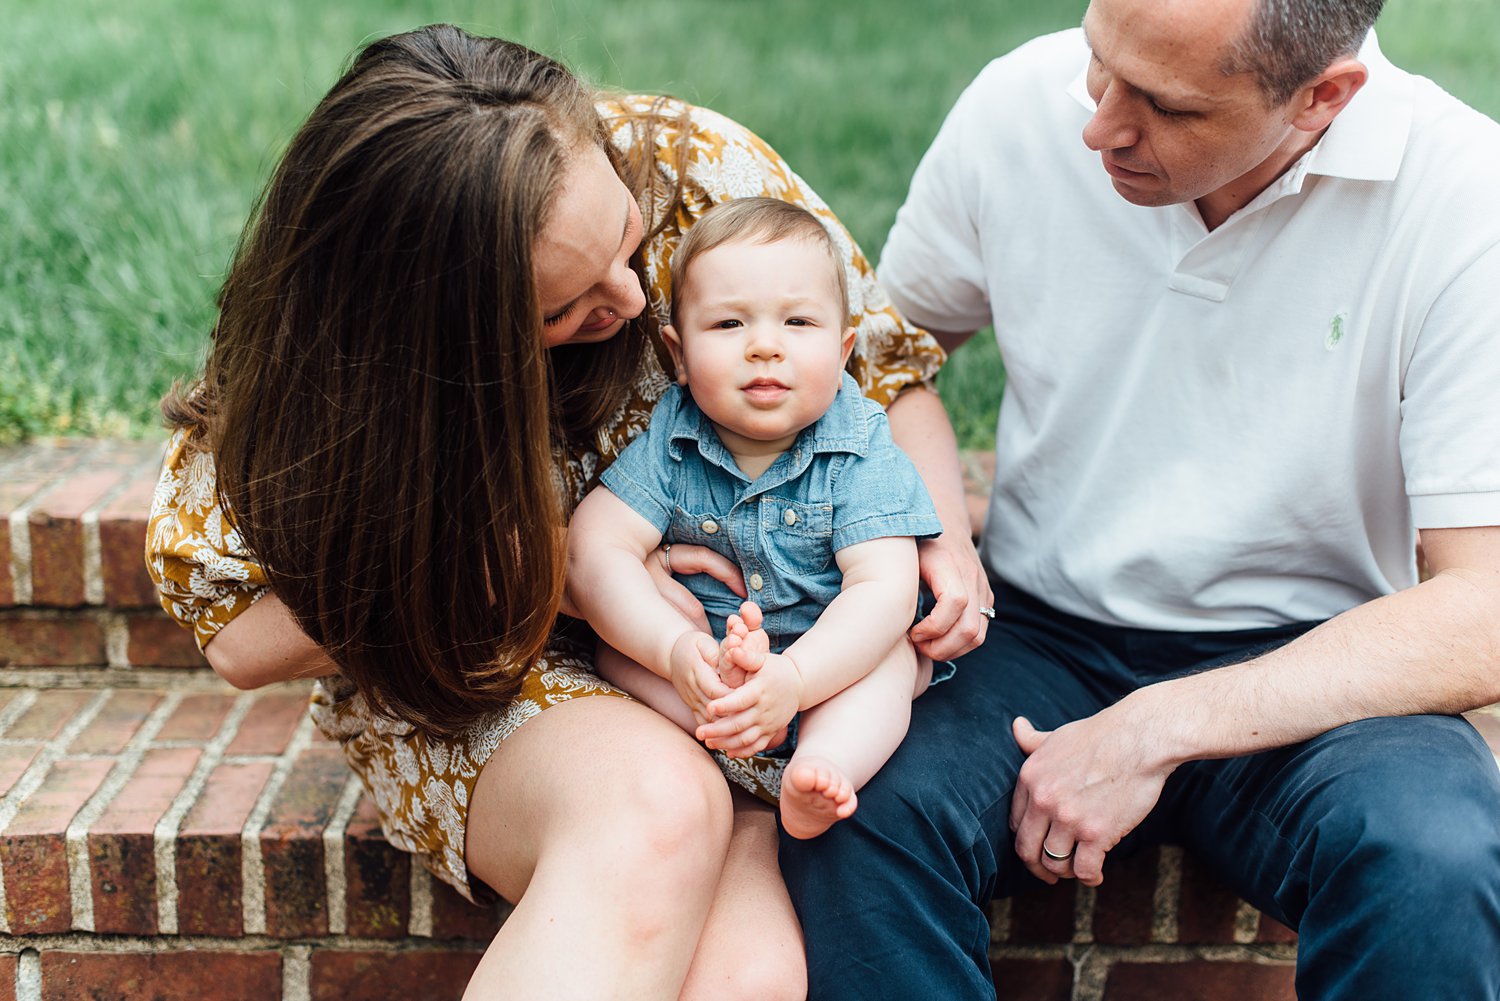 Jenna + Dave + Dylan - Longwood Gardens Family Session - Chester County Family Photographer - Alison Dunn Photography photo